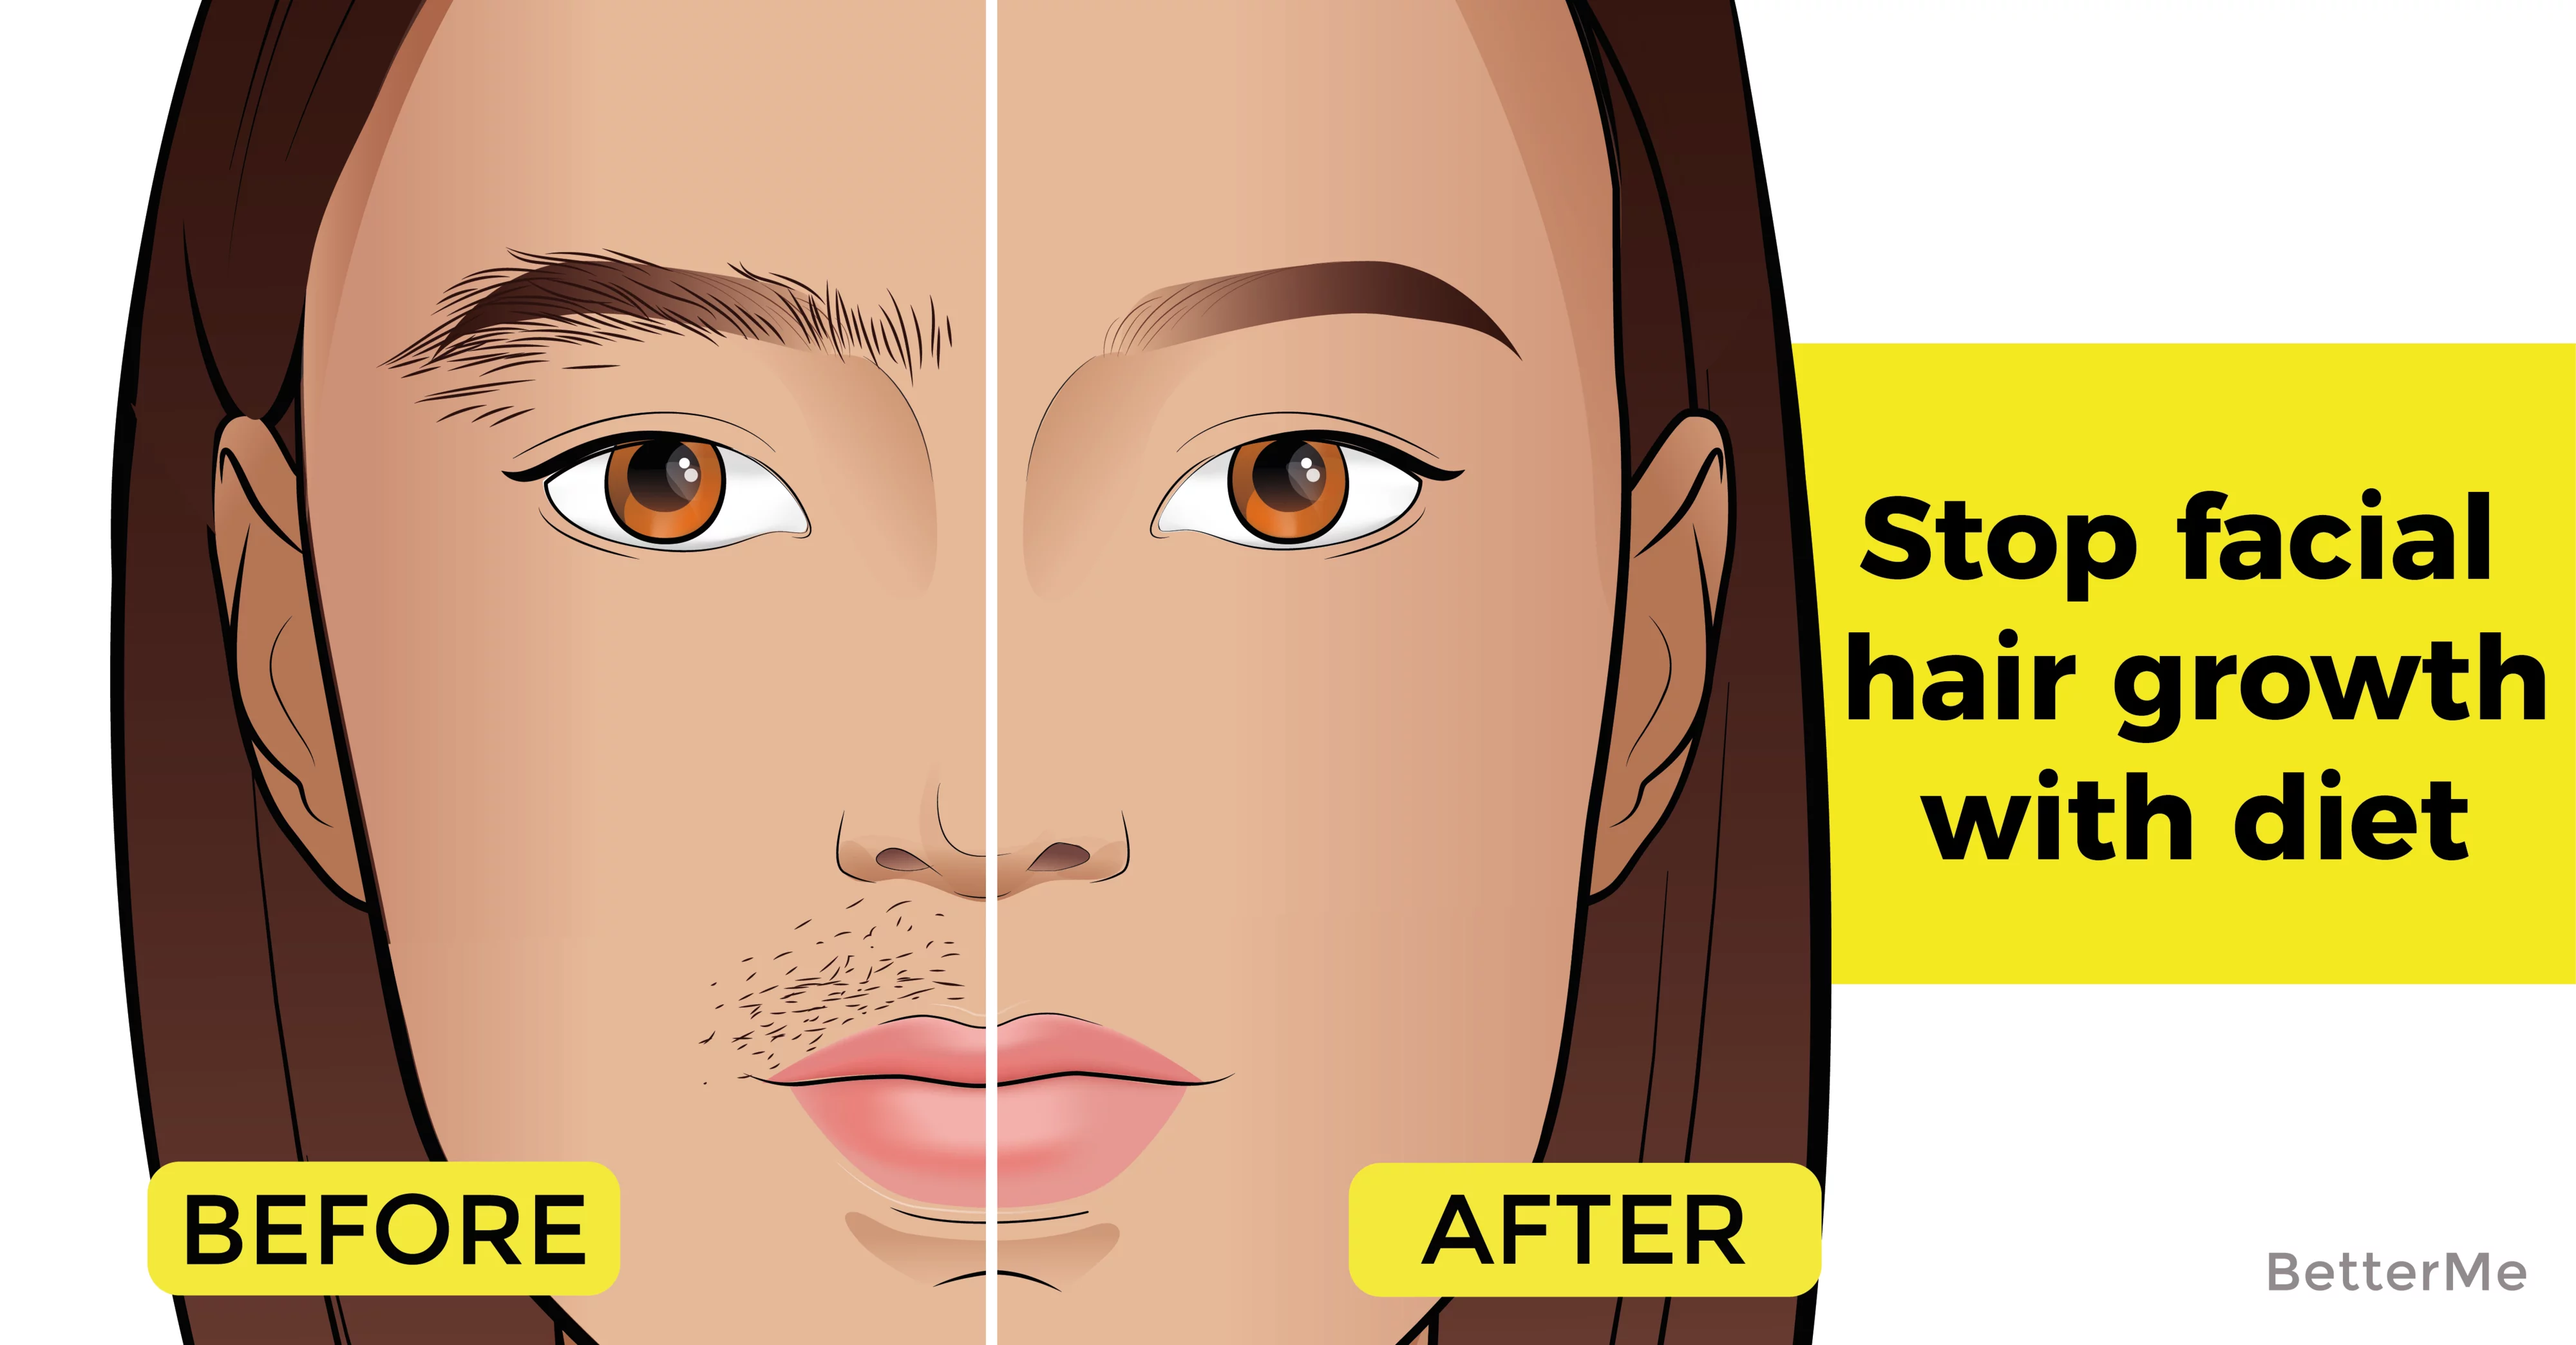 Changing Your Diet This Way May Help You To Stop Facial Hair Growth